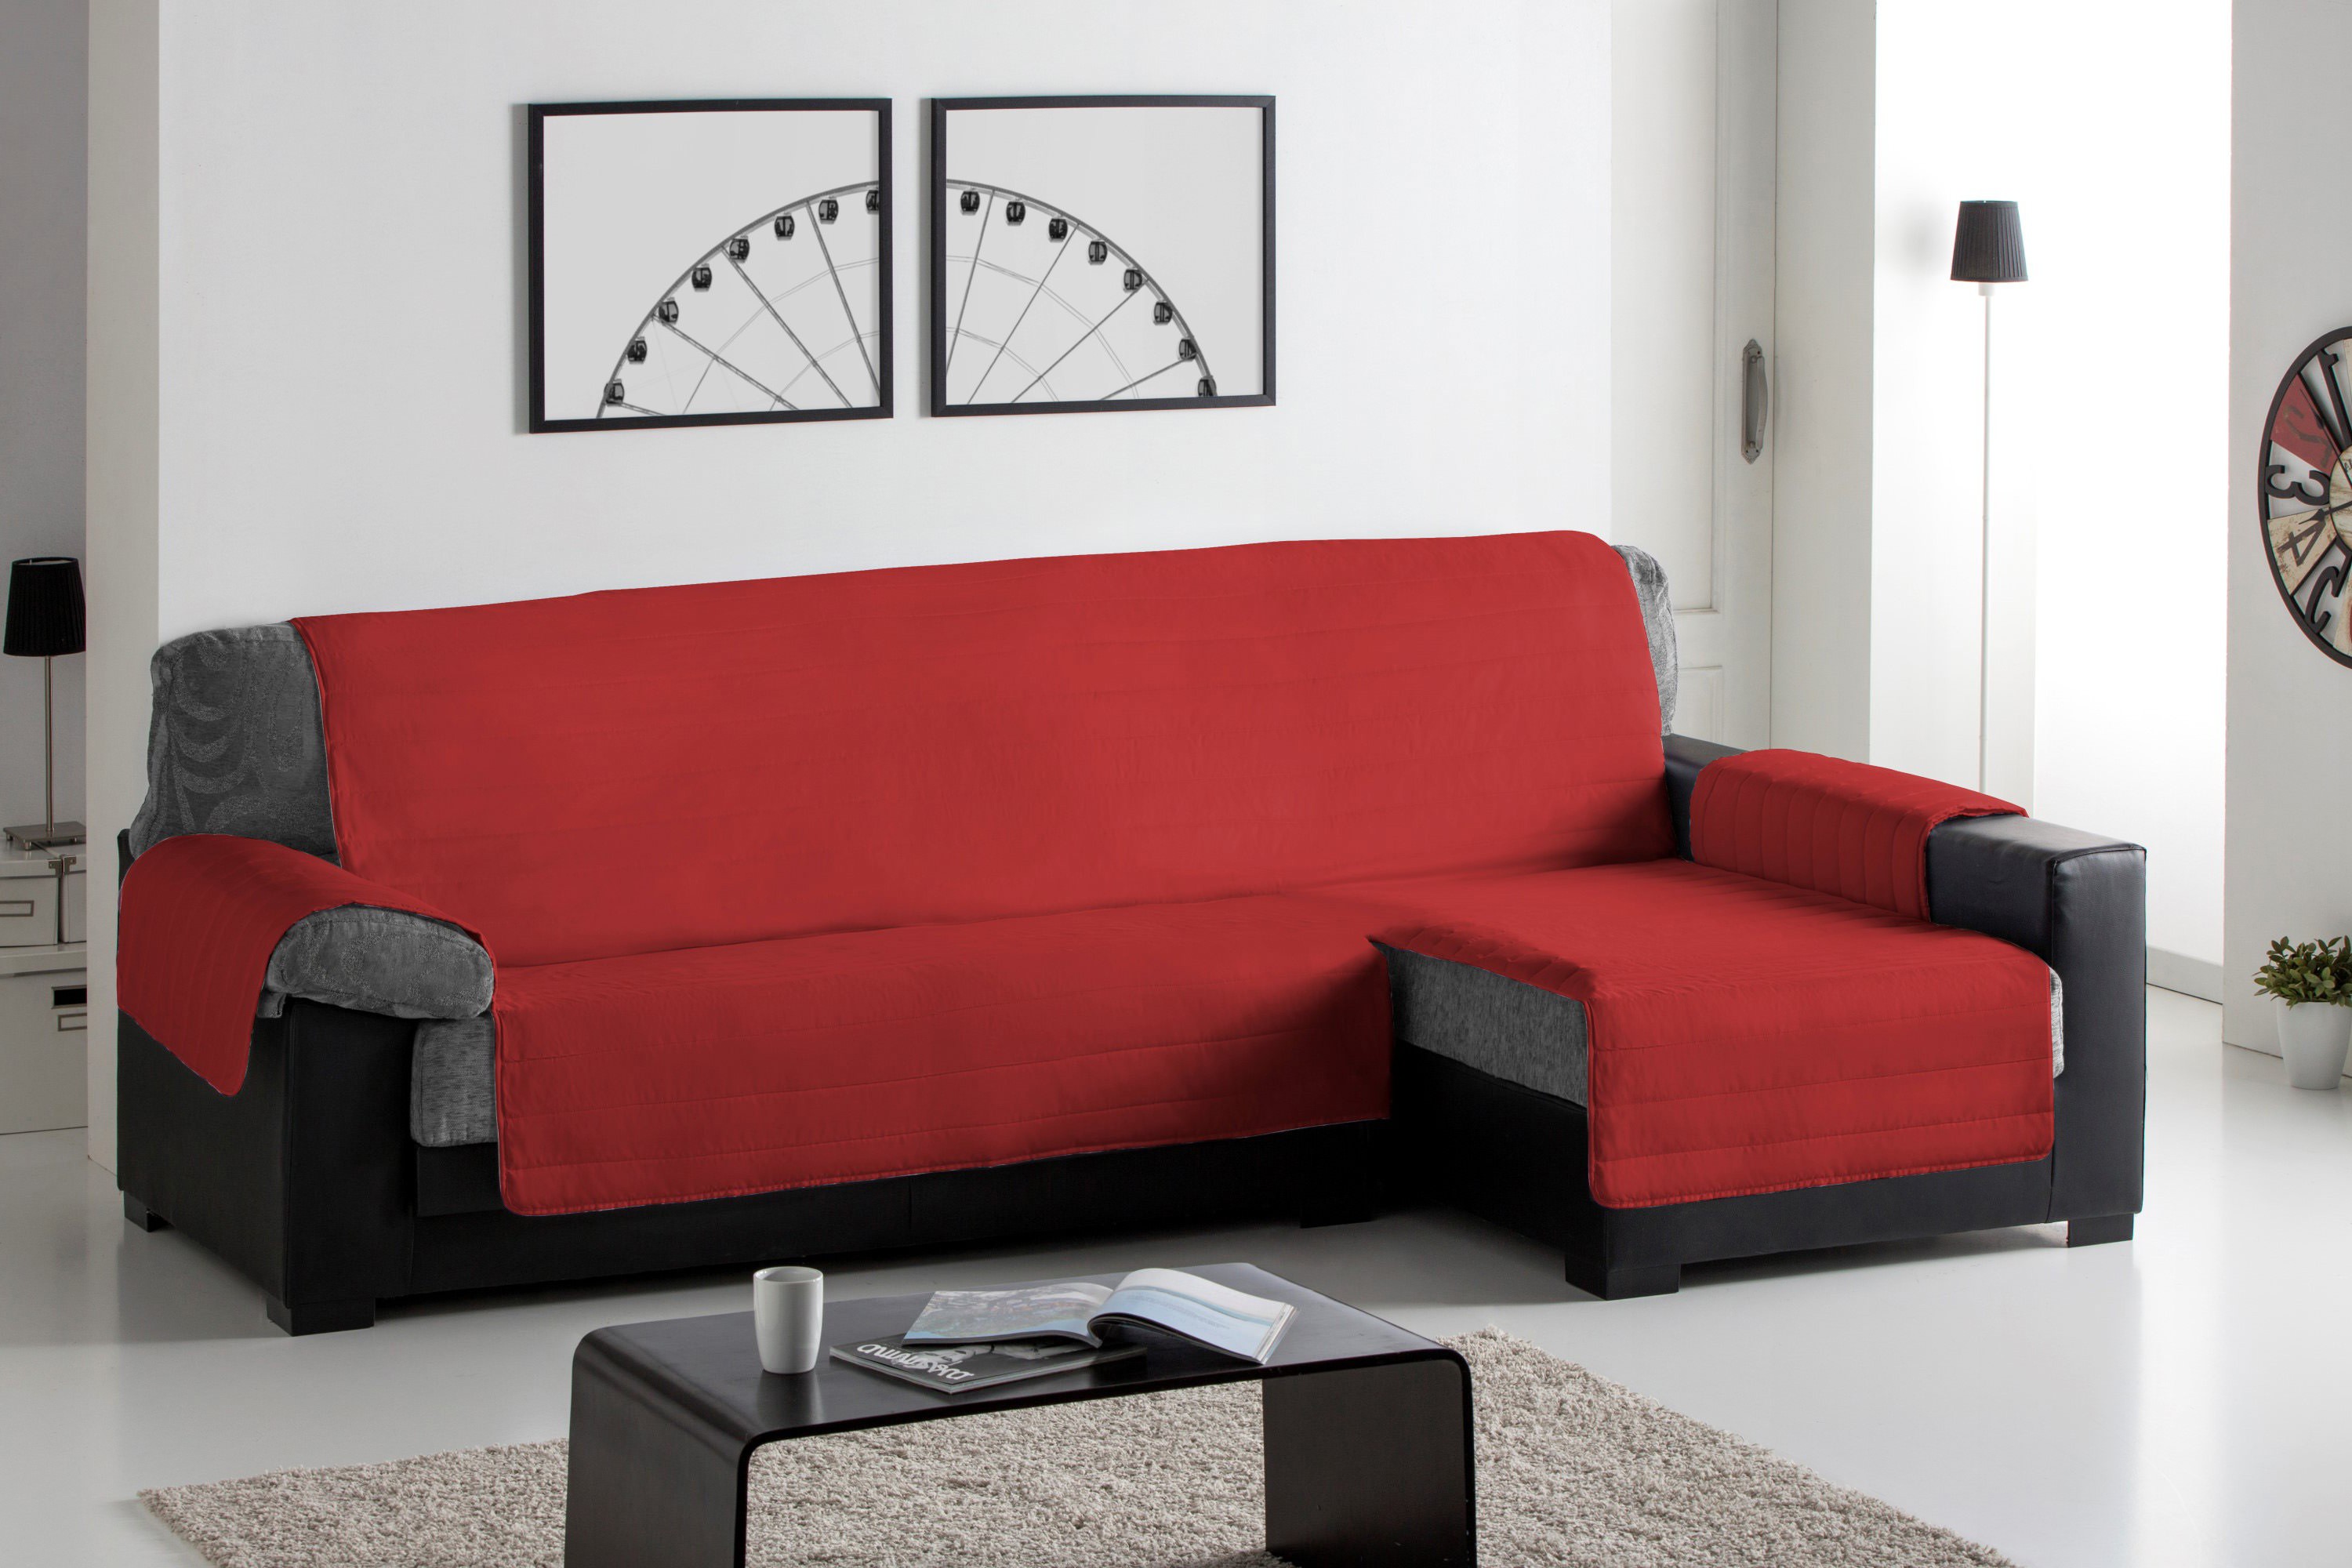 Cubre Sofa Acolchado Chaise Longue Derecho color Granate, , large image number null